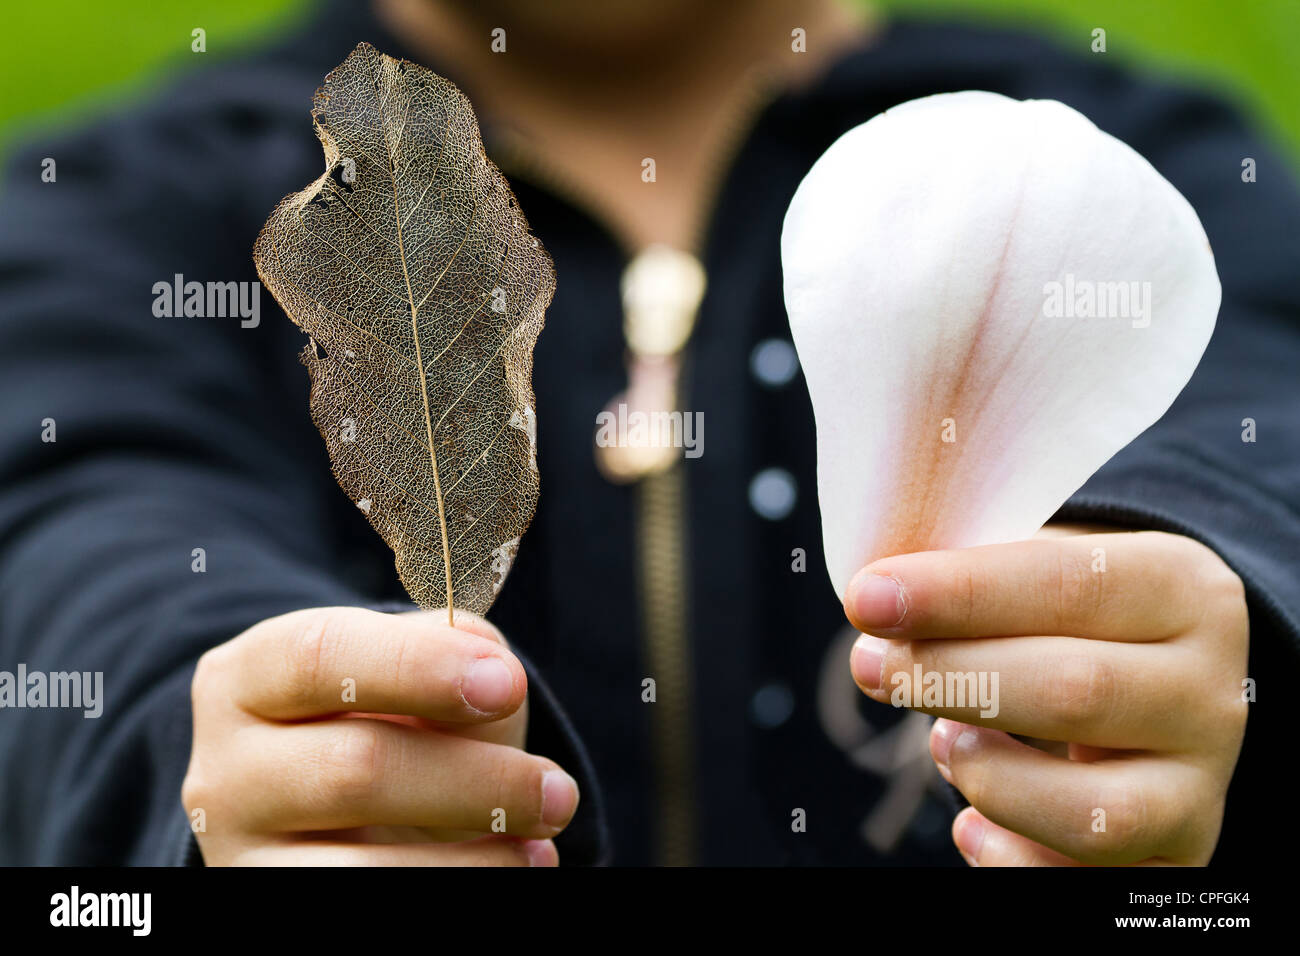 Leaf Vein and flower Petal Stock Photo